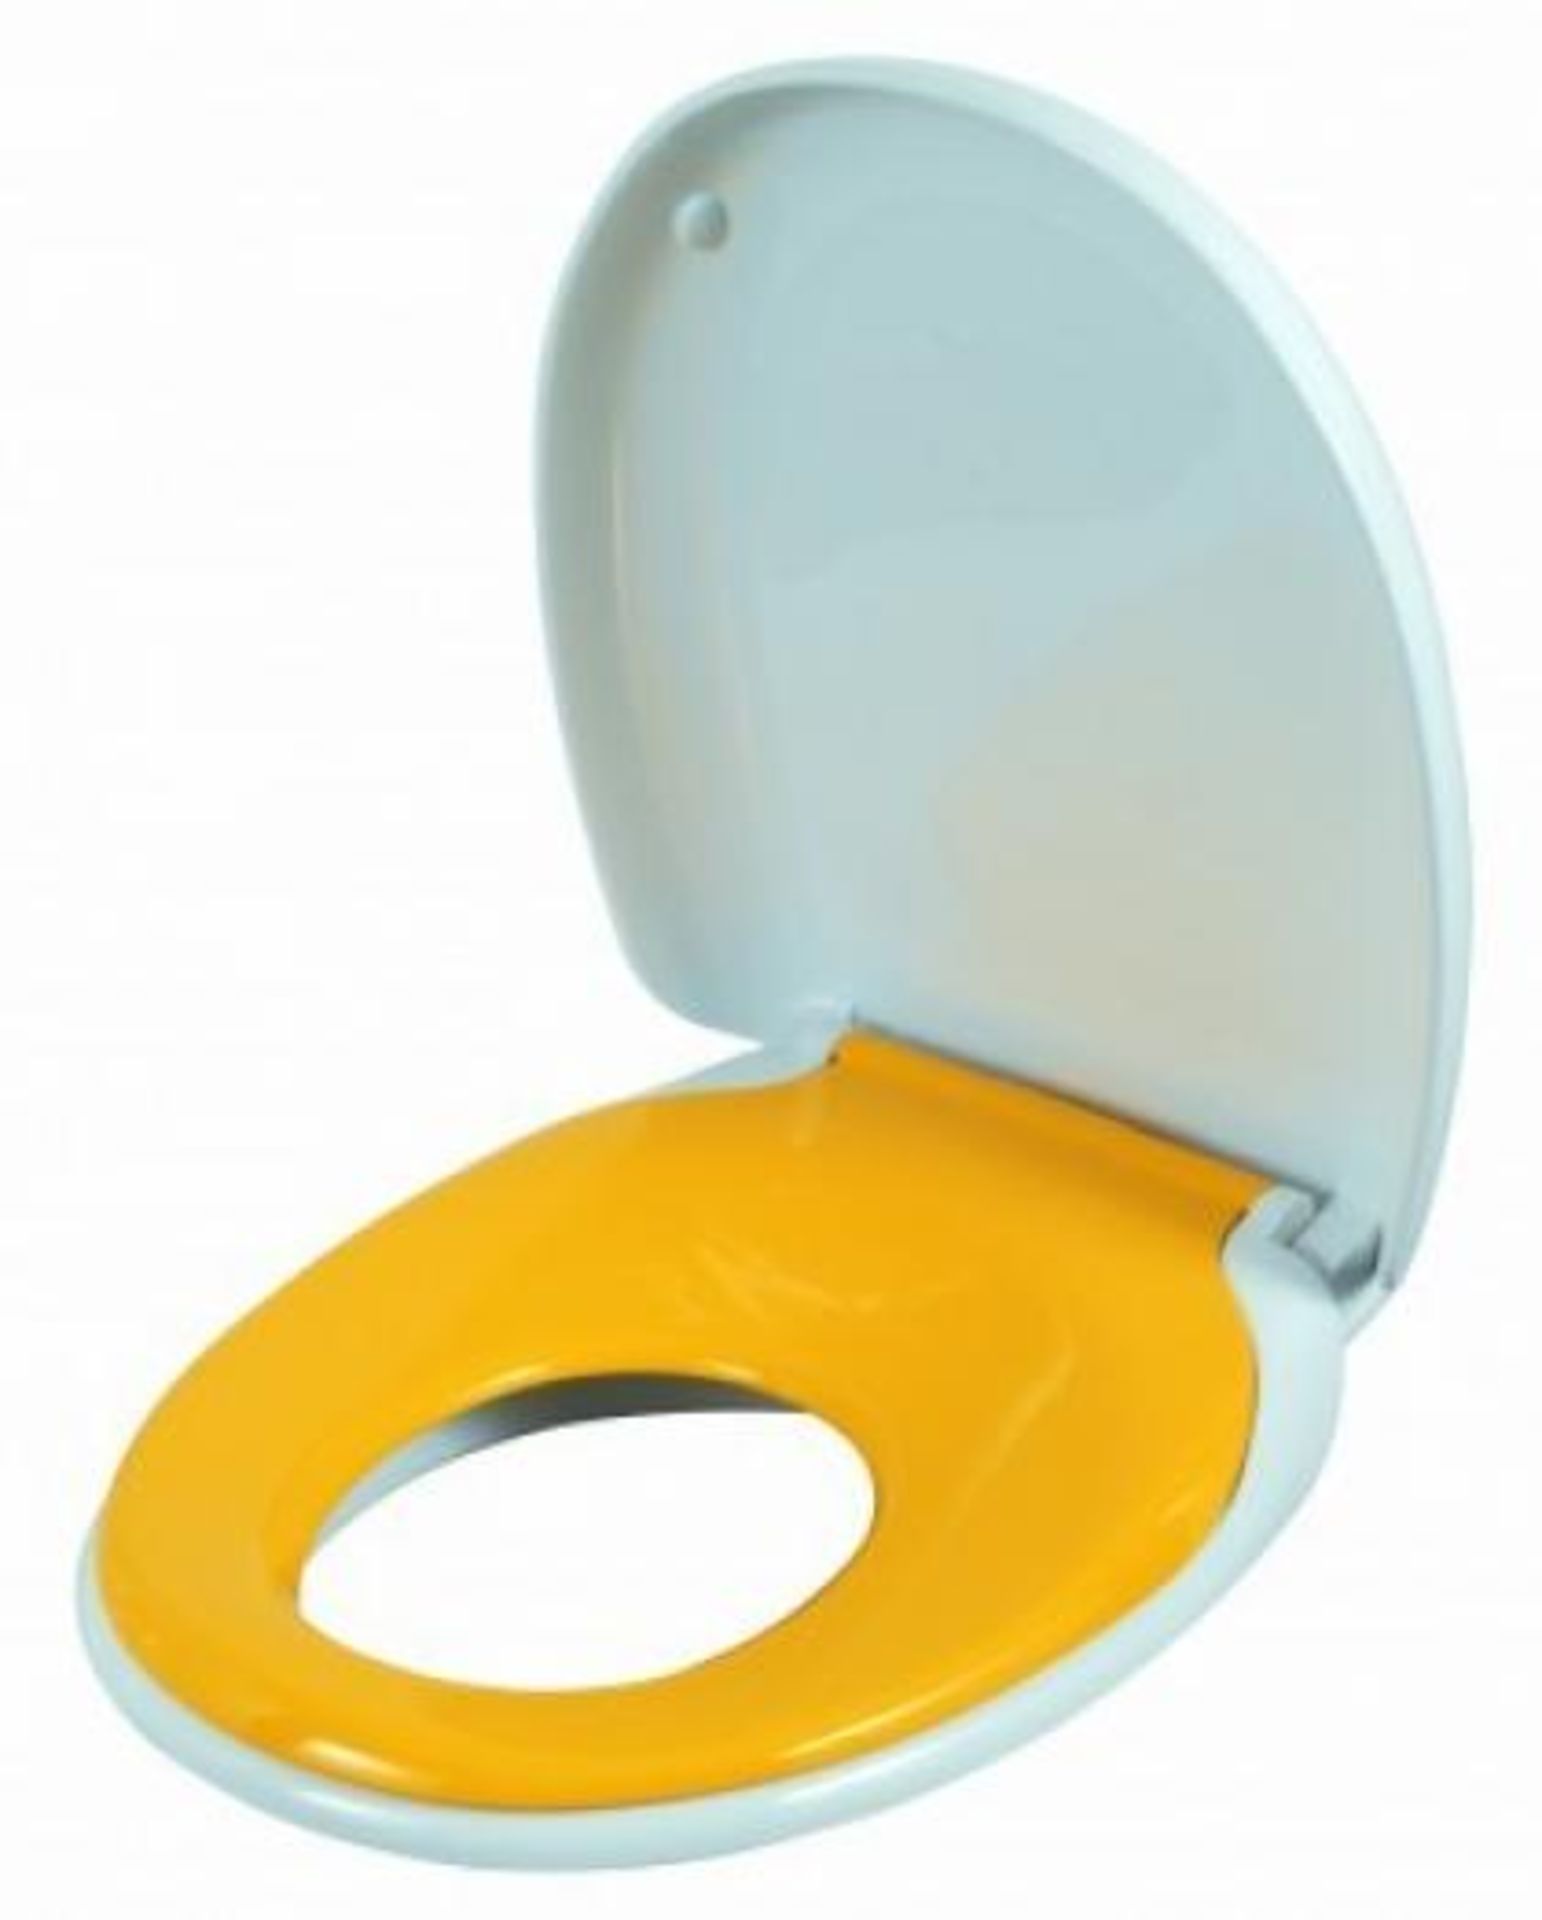 1 x Dubaloo 2 in 1 Family Training Toilet Seat - One Seat For All The Family - Full Size Toilet Seat - Image 3 of 7